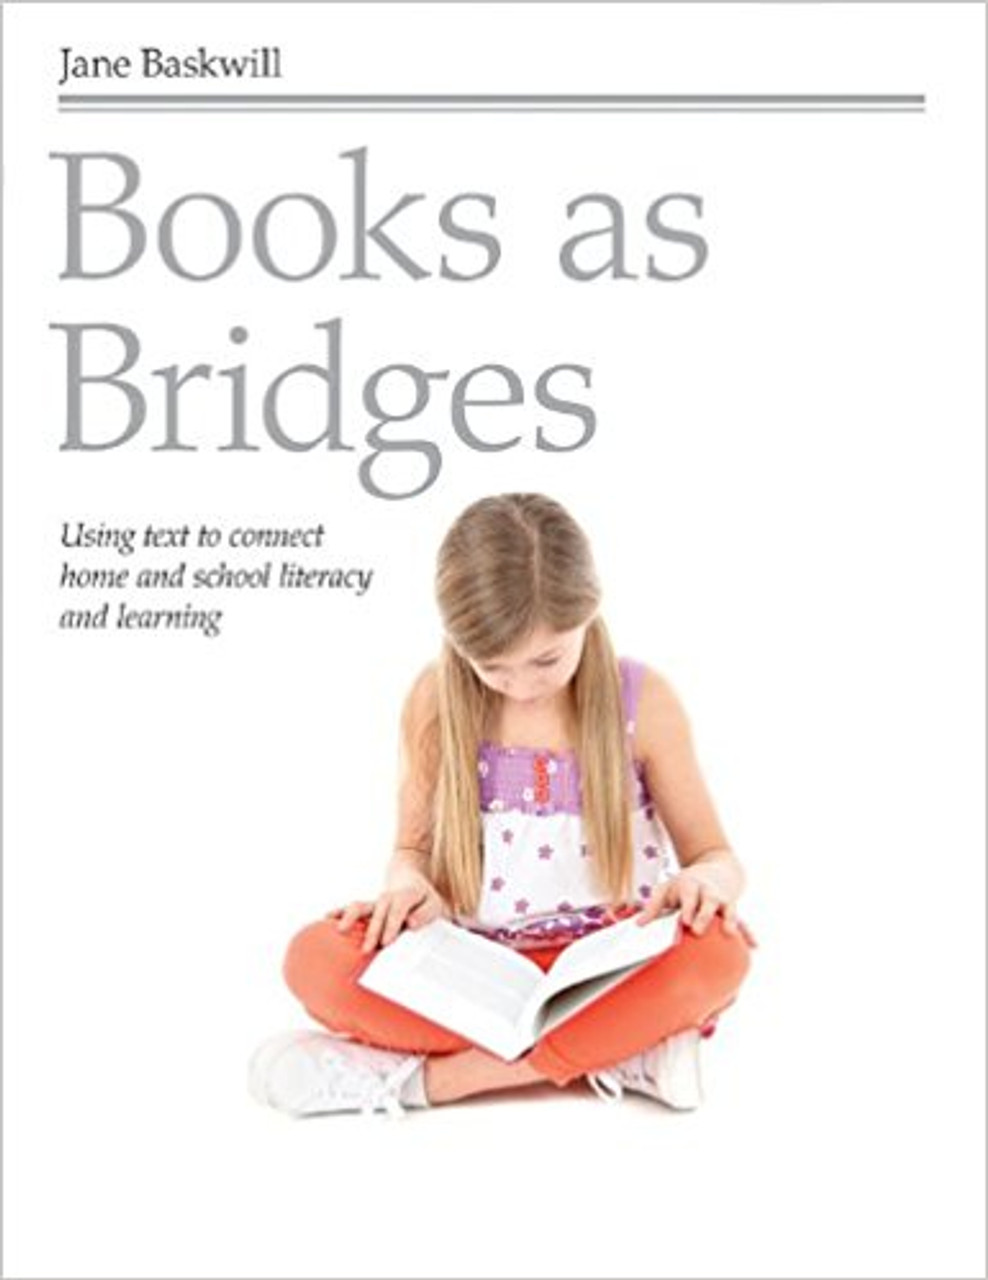 Books as Bridges: Using Text to Connect Home and School Literacy and Learning by Jane Baskwill